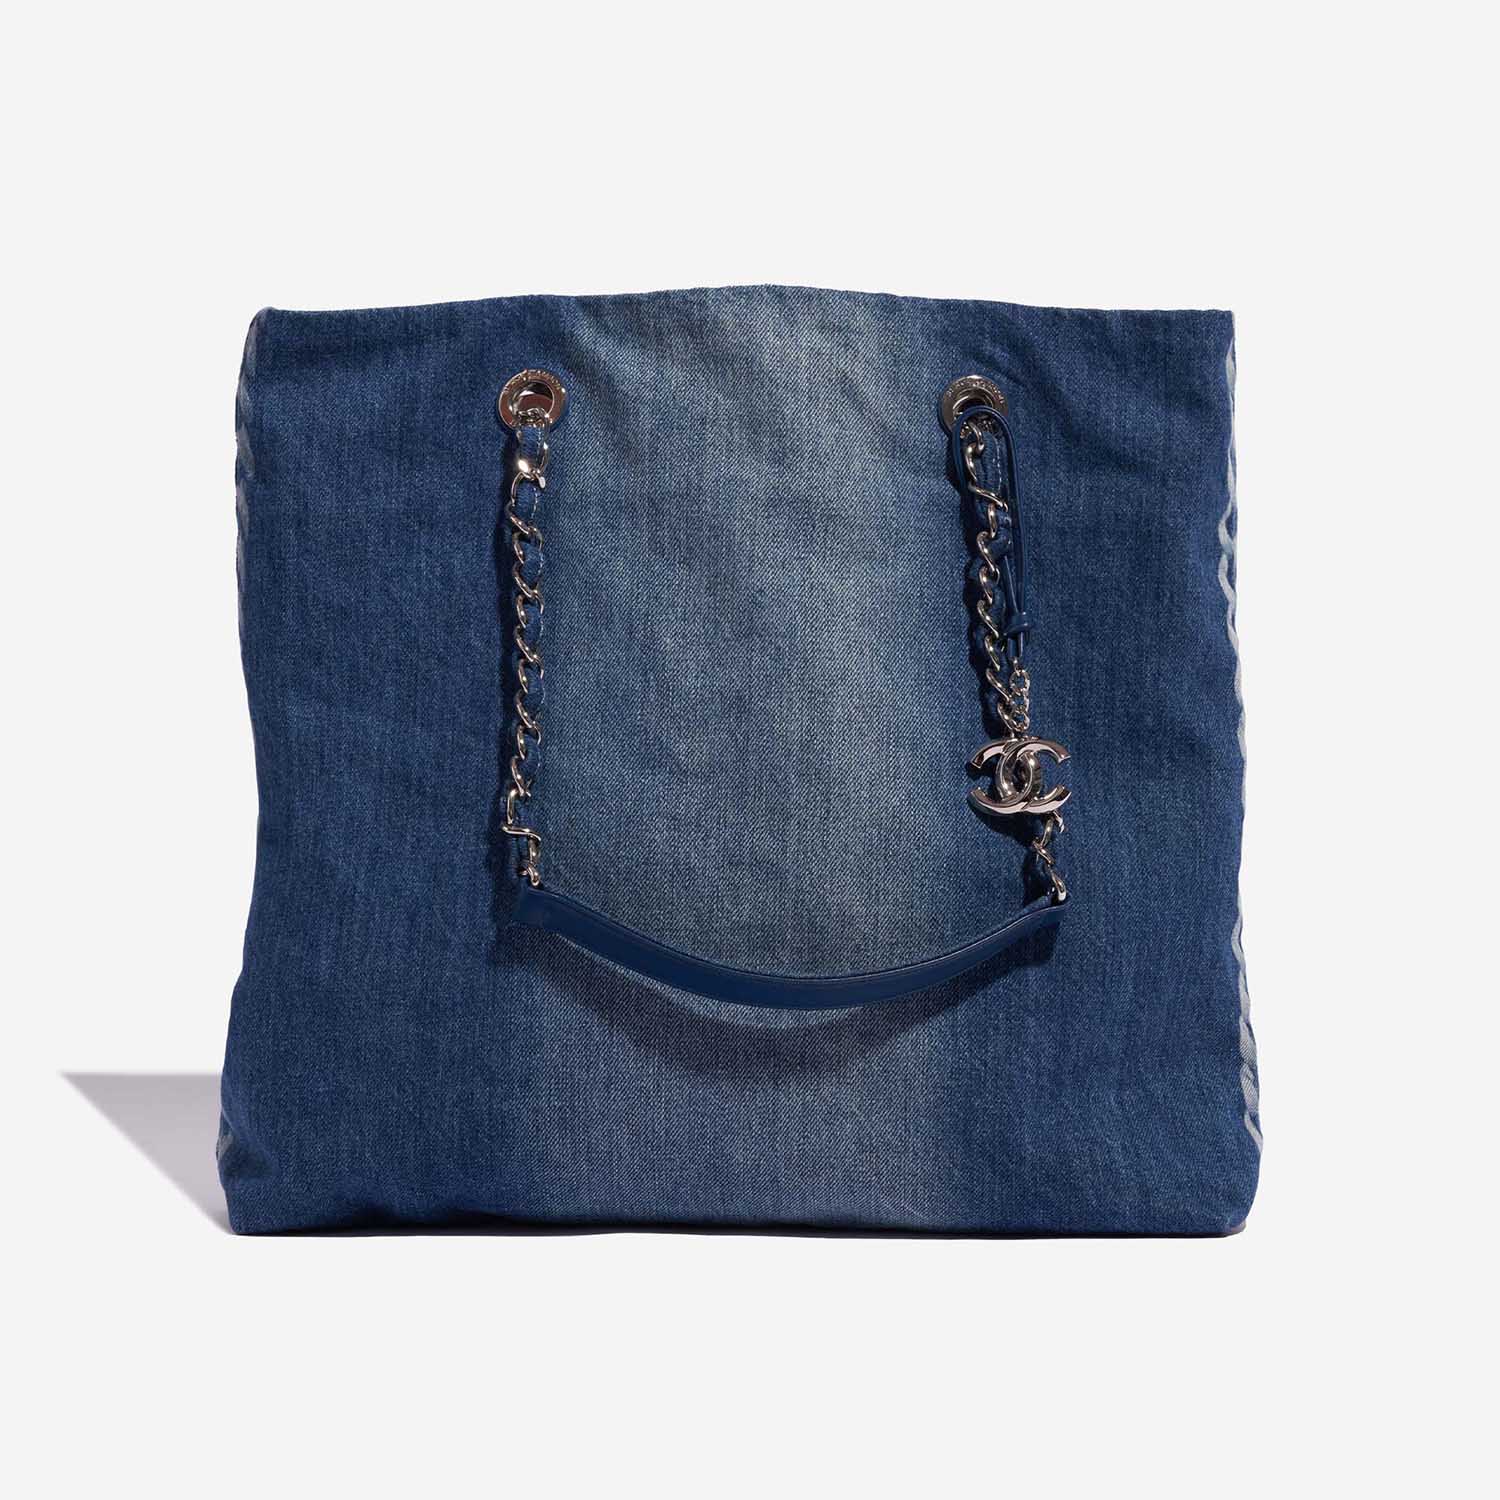 Snag the Latest CHANEL Denim Exterior Tote Bags & Handbags for